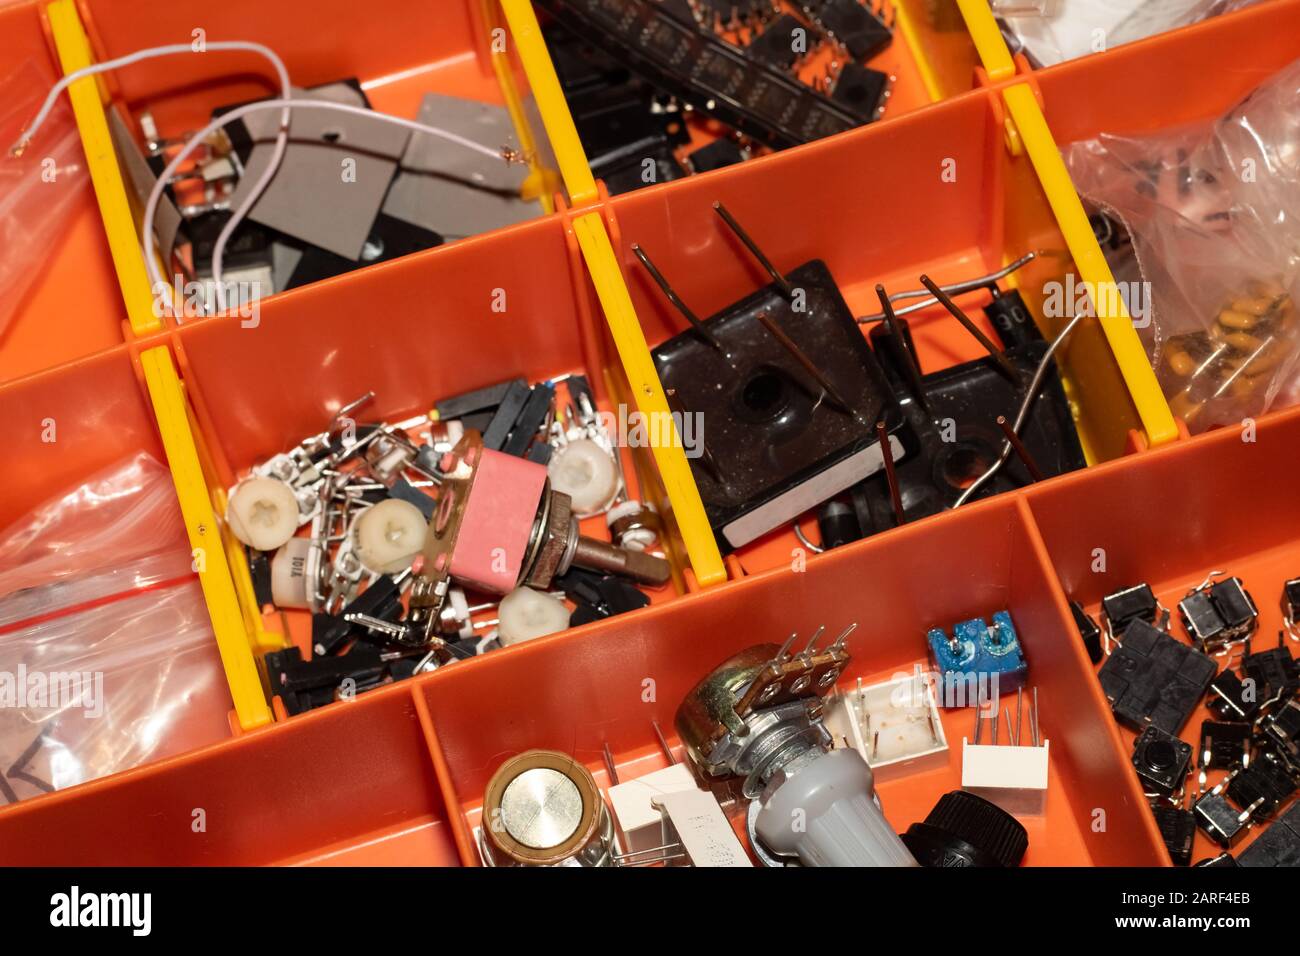 Plastic container with parts and spare parts Stock Photo